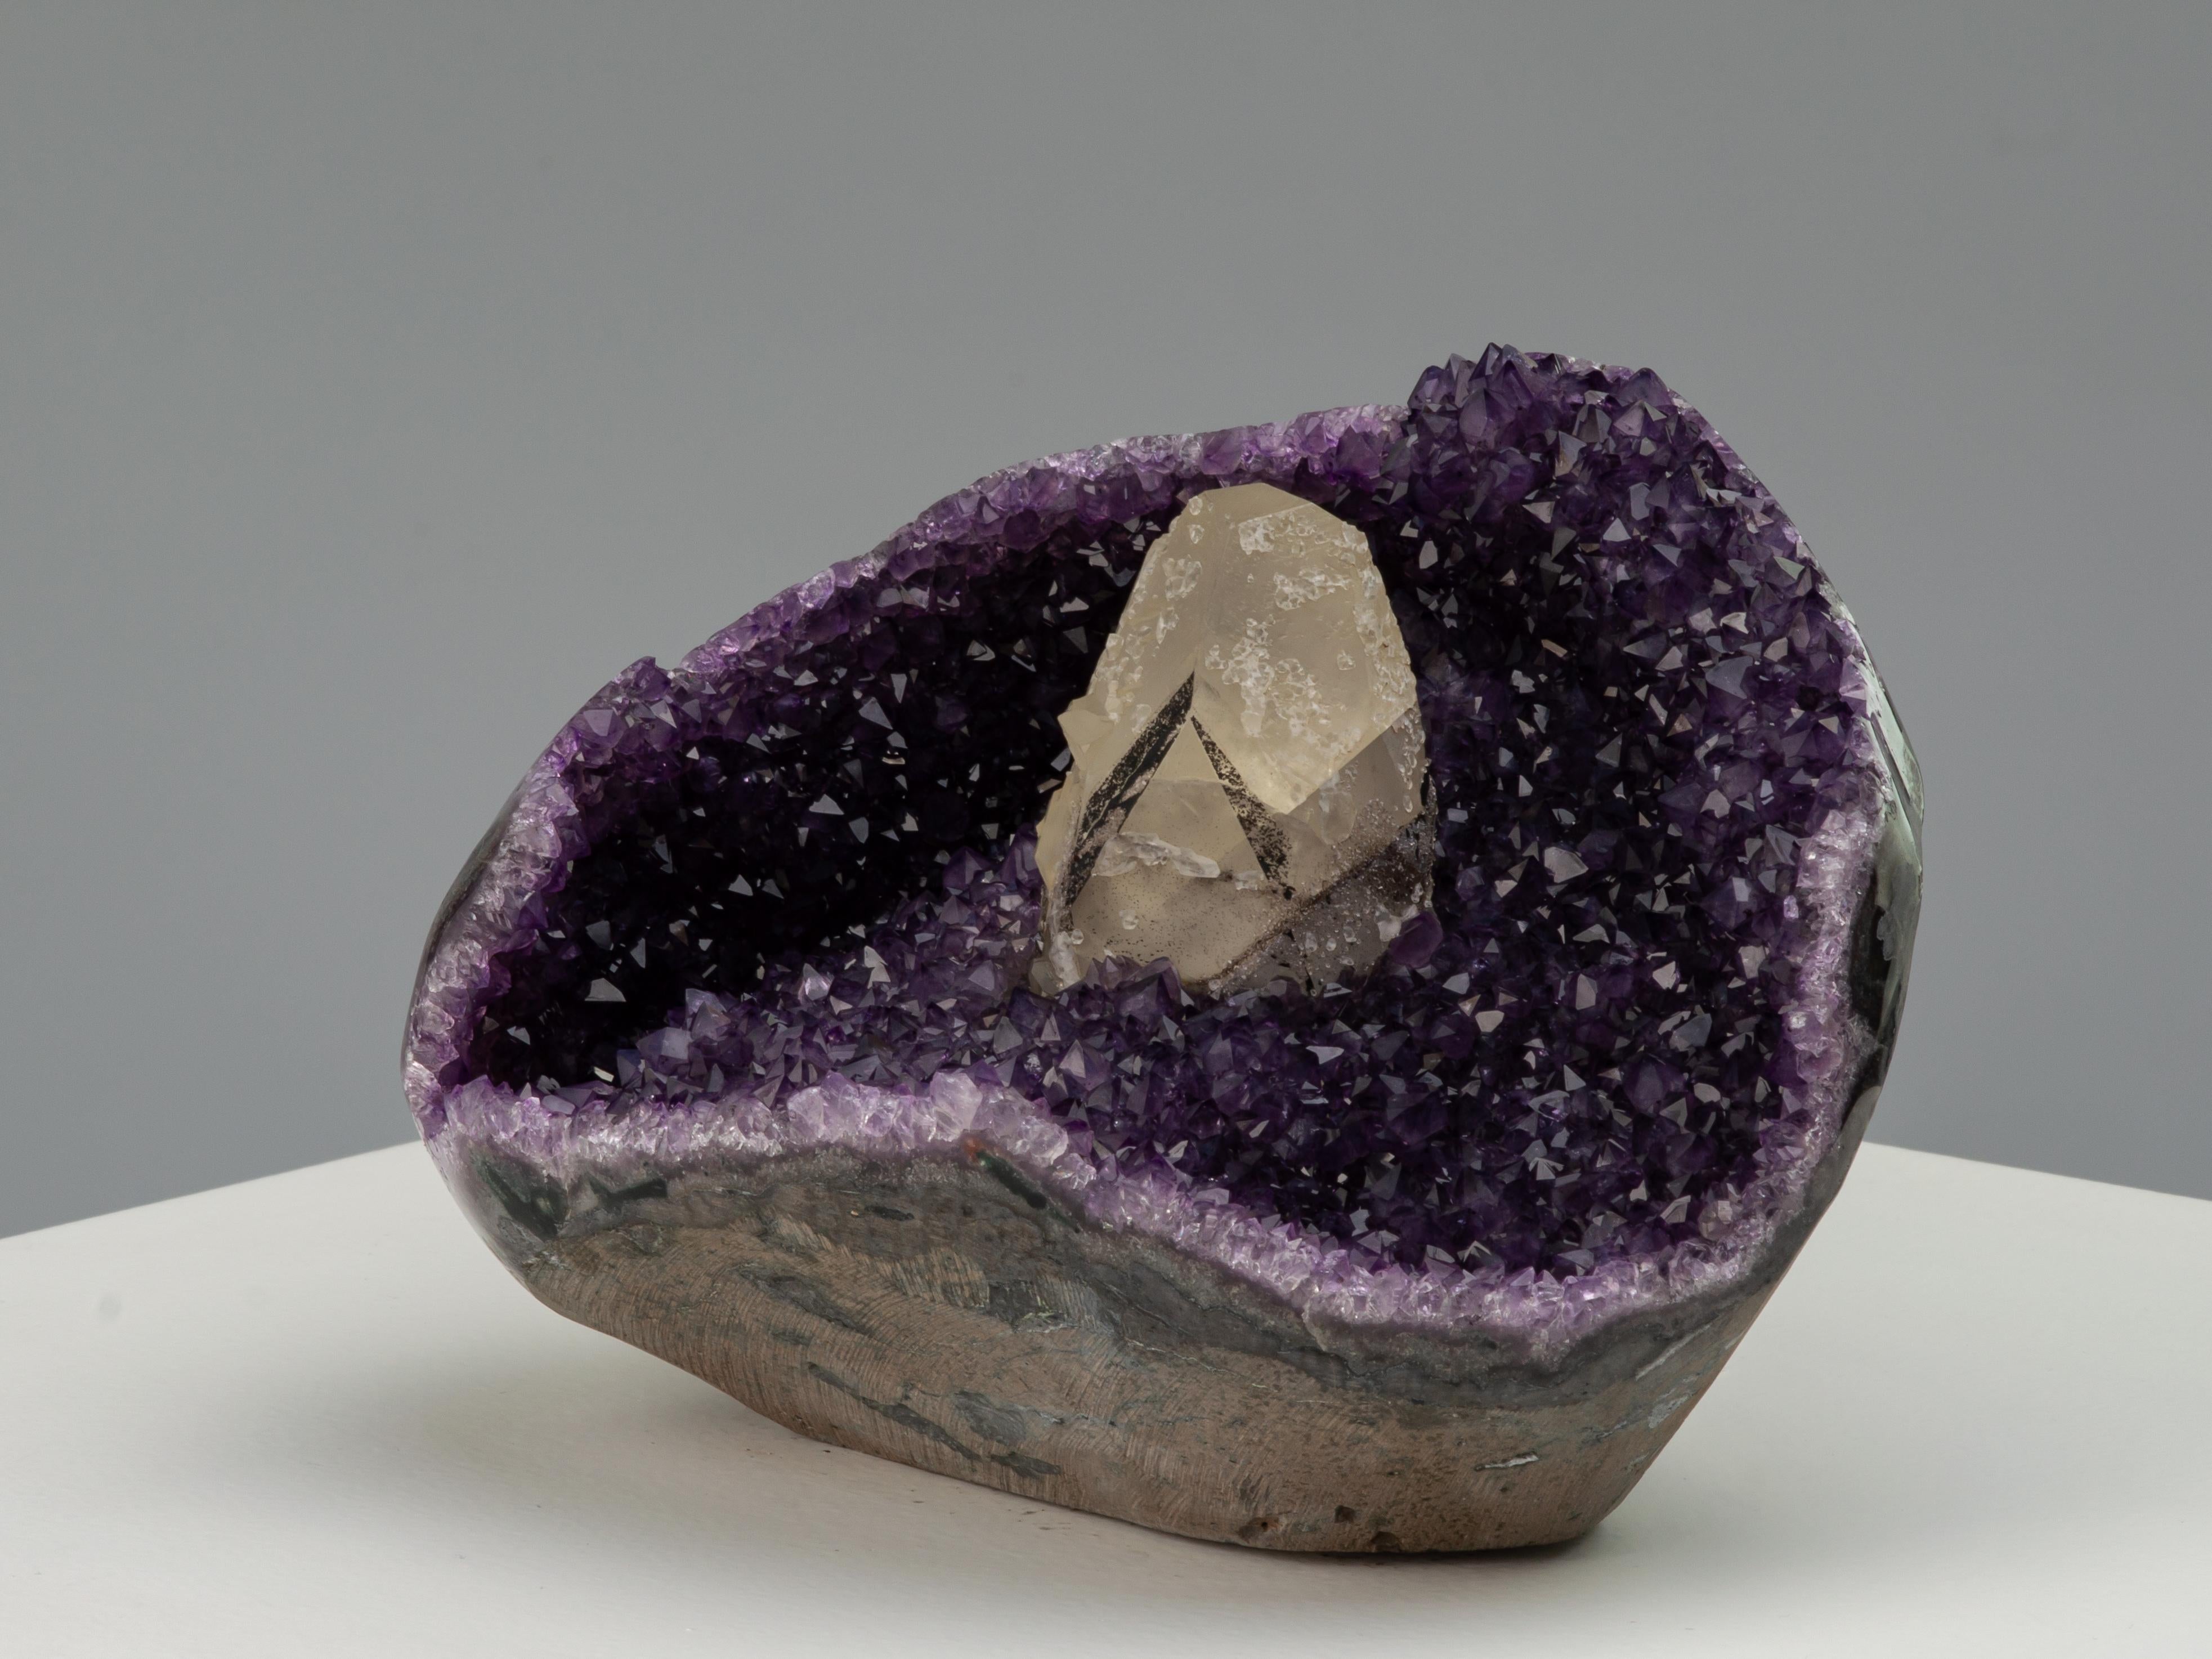 Uruguayan Amethyst calcite and black epitaxial goethite - a rare stone formation For Sale